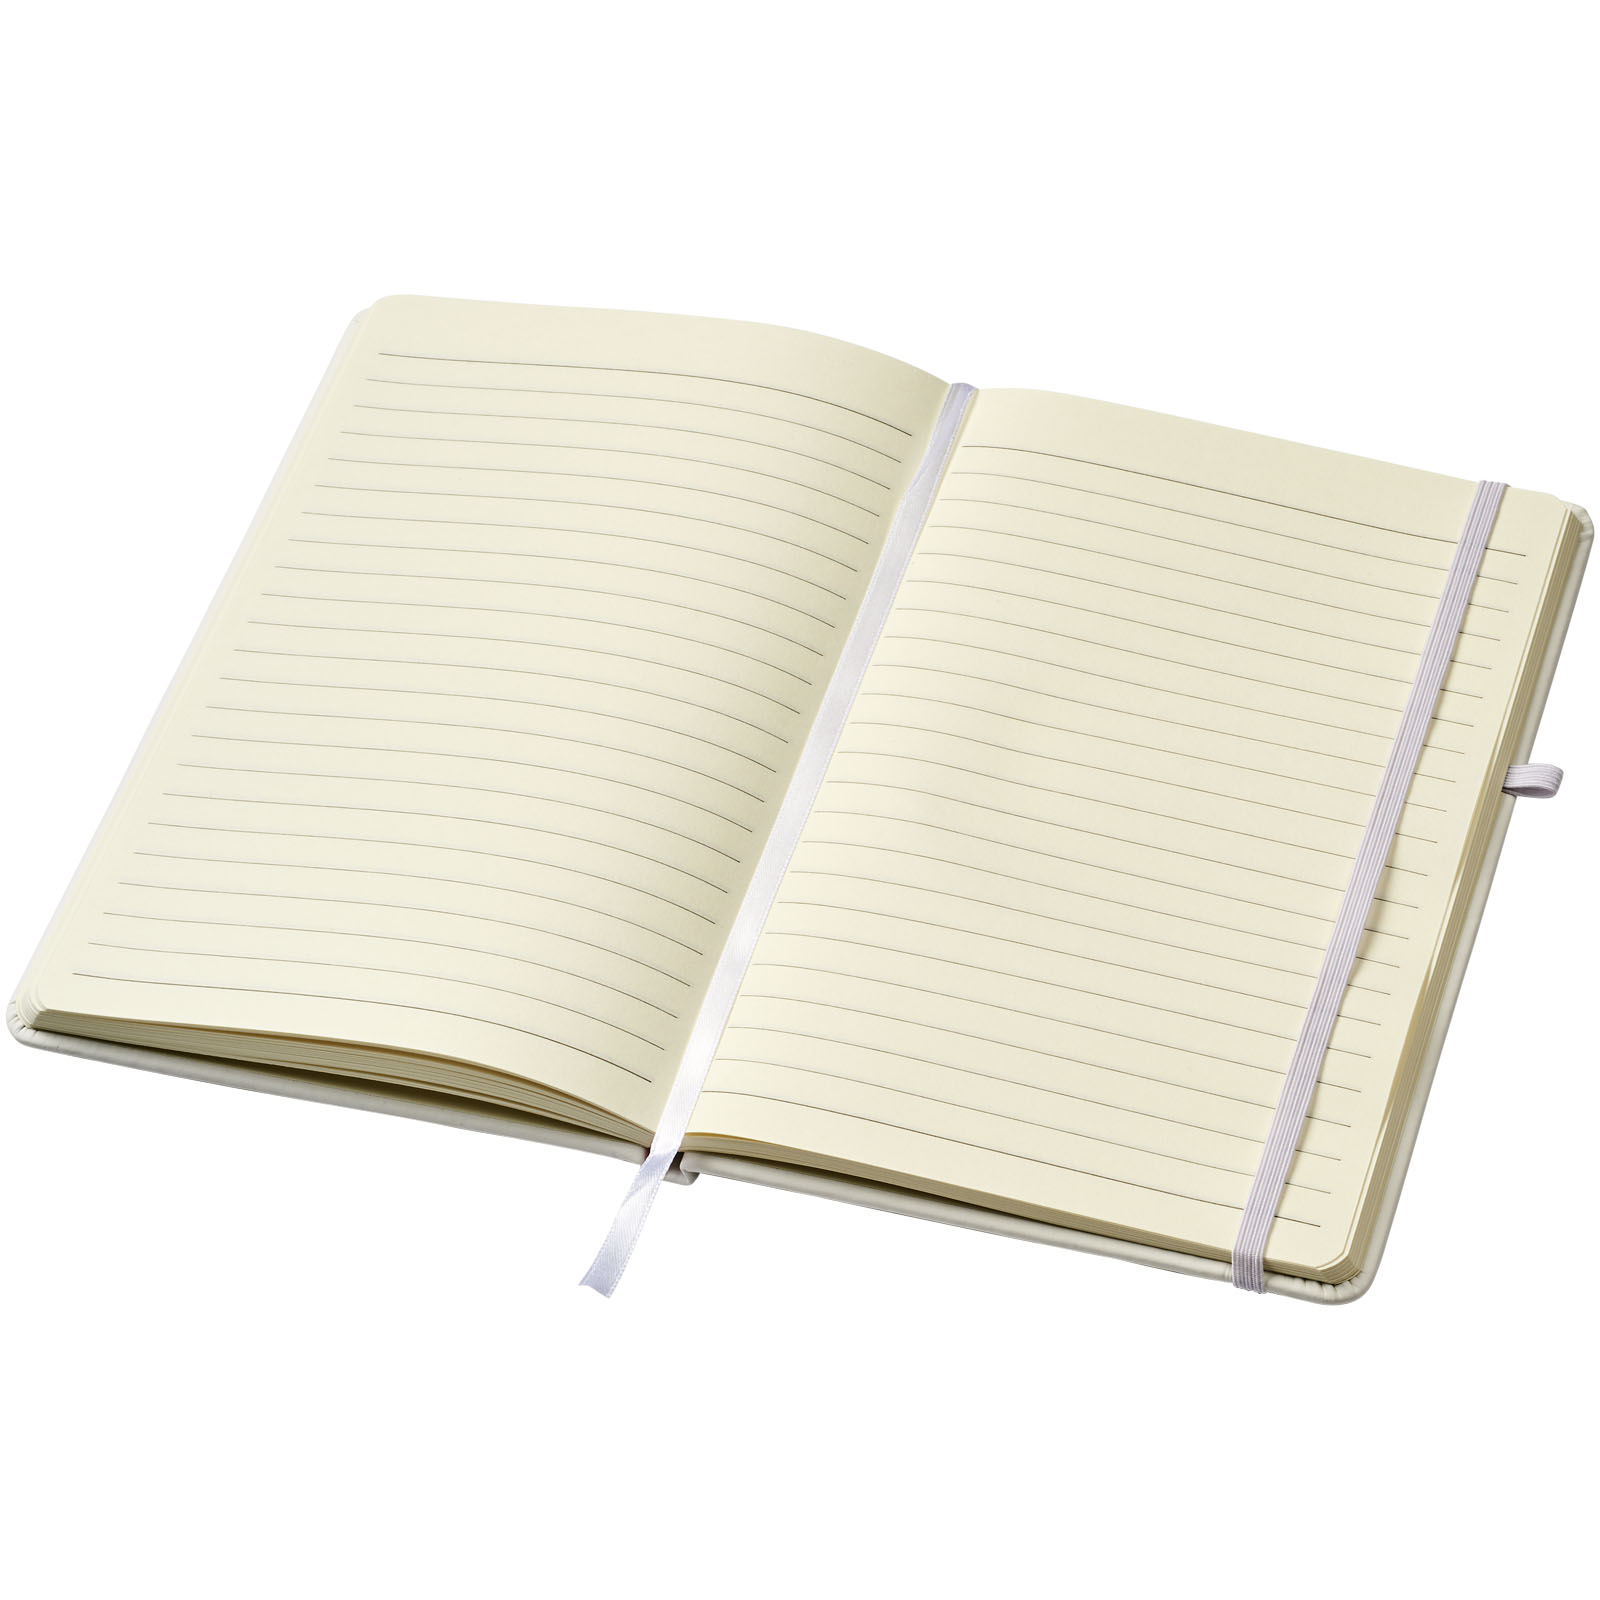 Advertising Hard cover notebooks - Polar A5 notebook with lined pages - 3